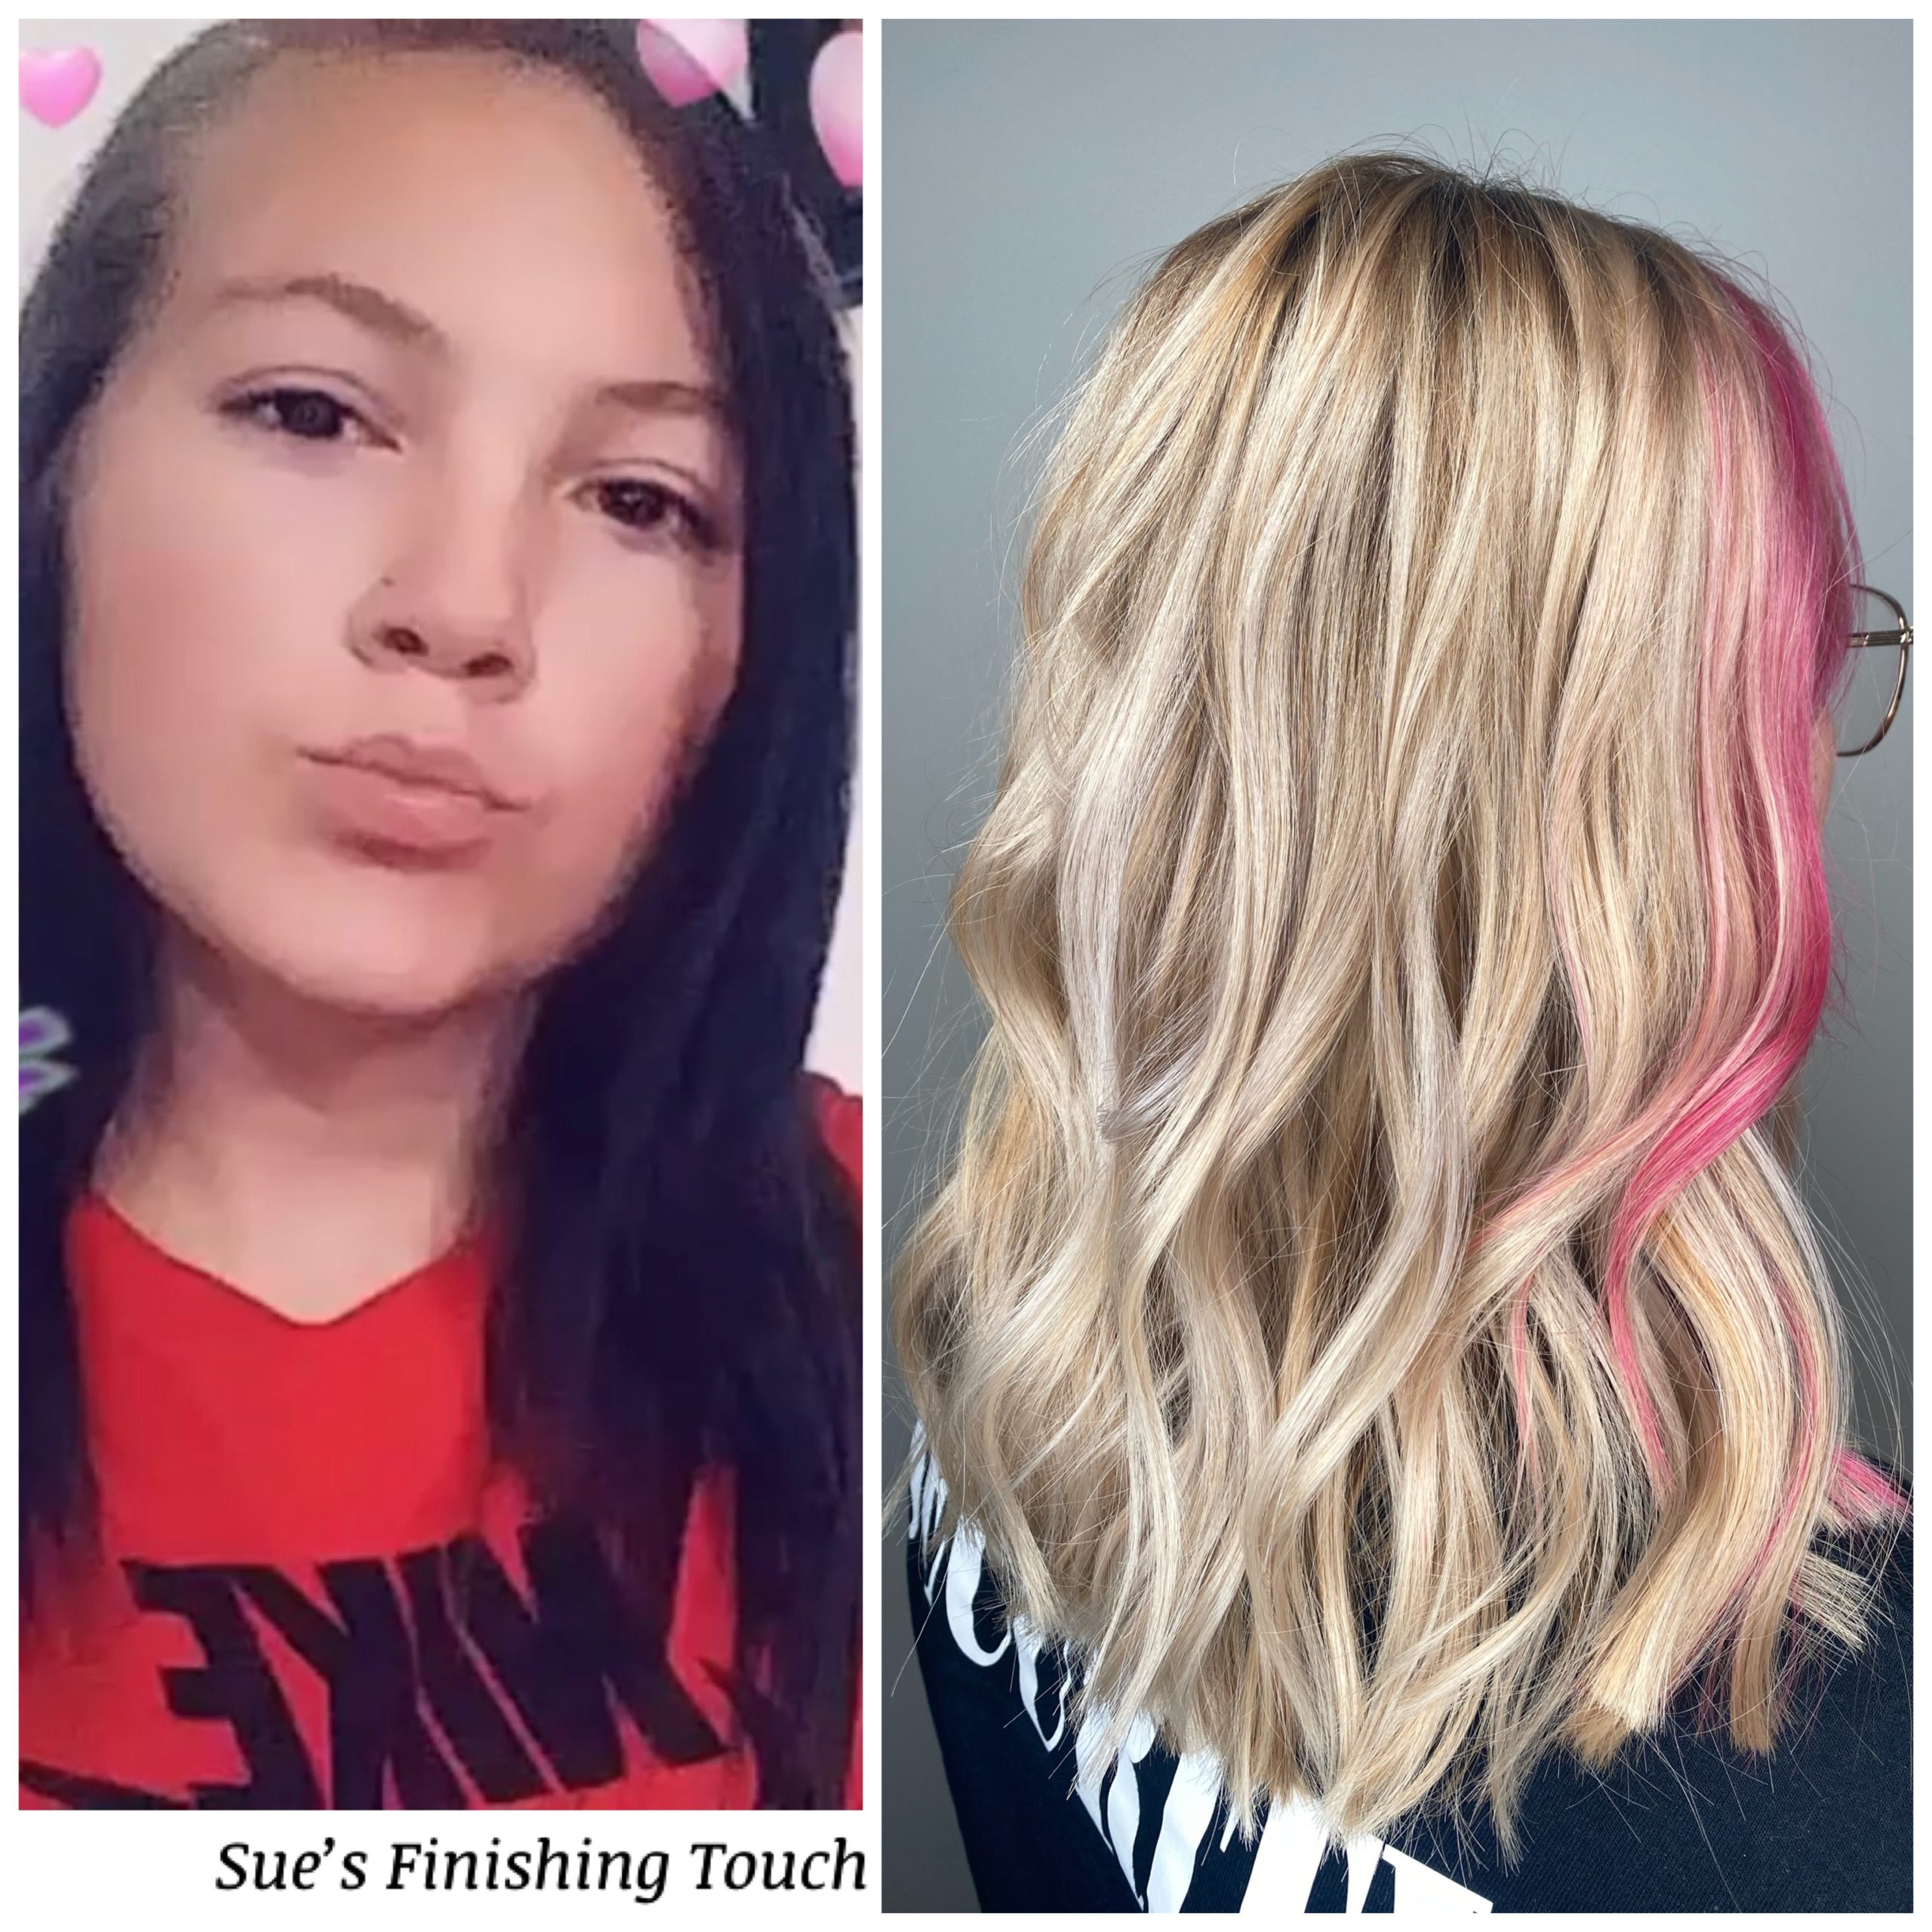 What a difference 2 years make! From black to blonde with a touch of pink, and a lot of patience! Looking fabulous!